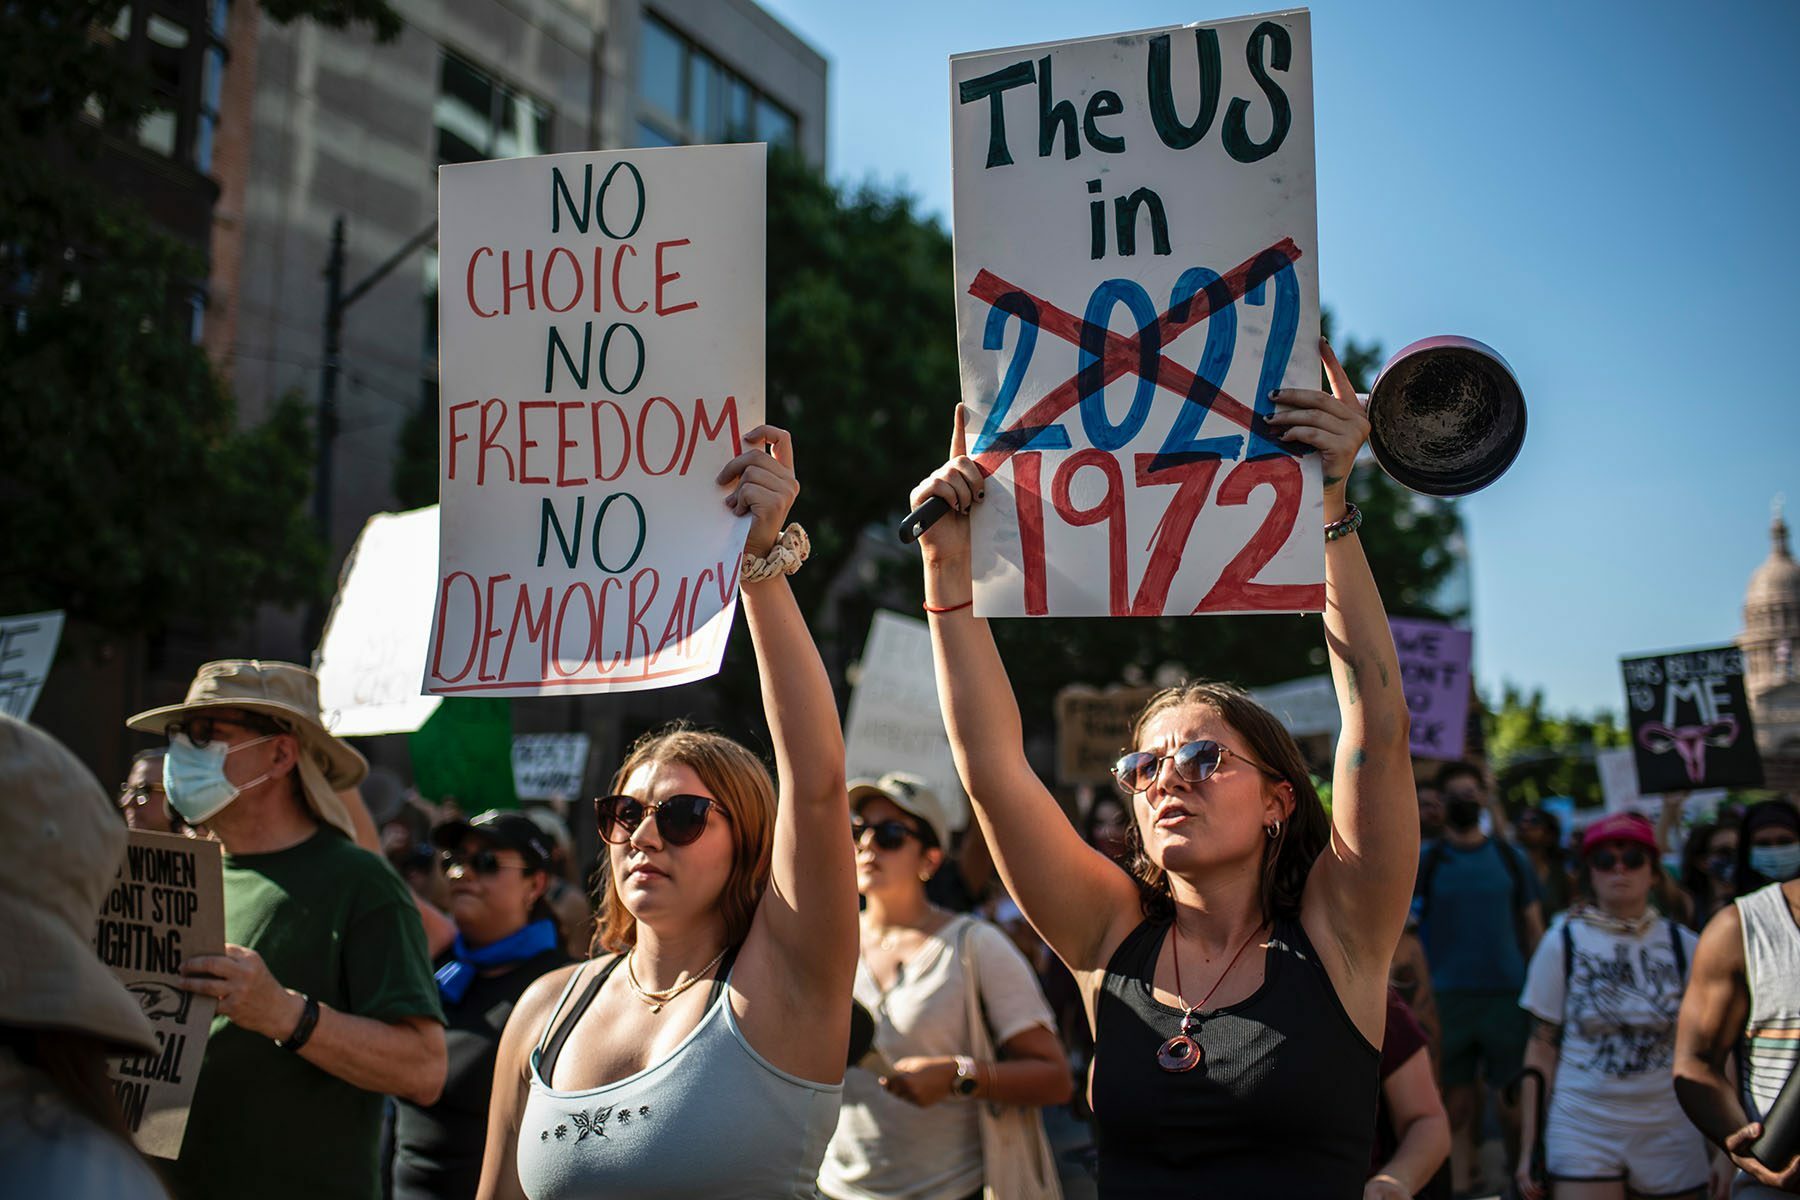 Protesters march while holding signs during an abortion-rights rally in Austin, Texas. The signs read 